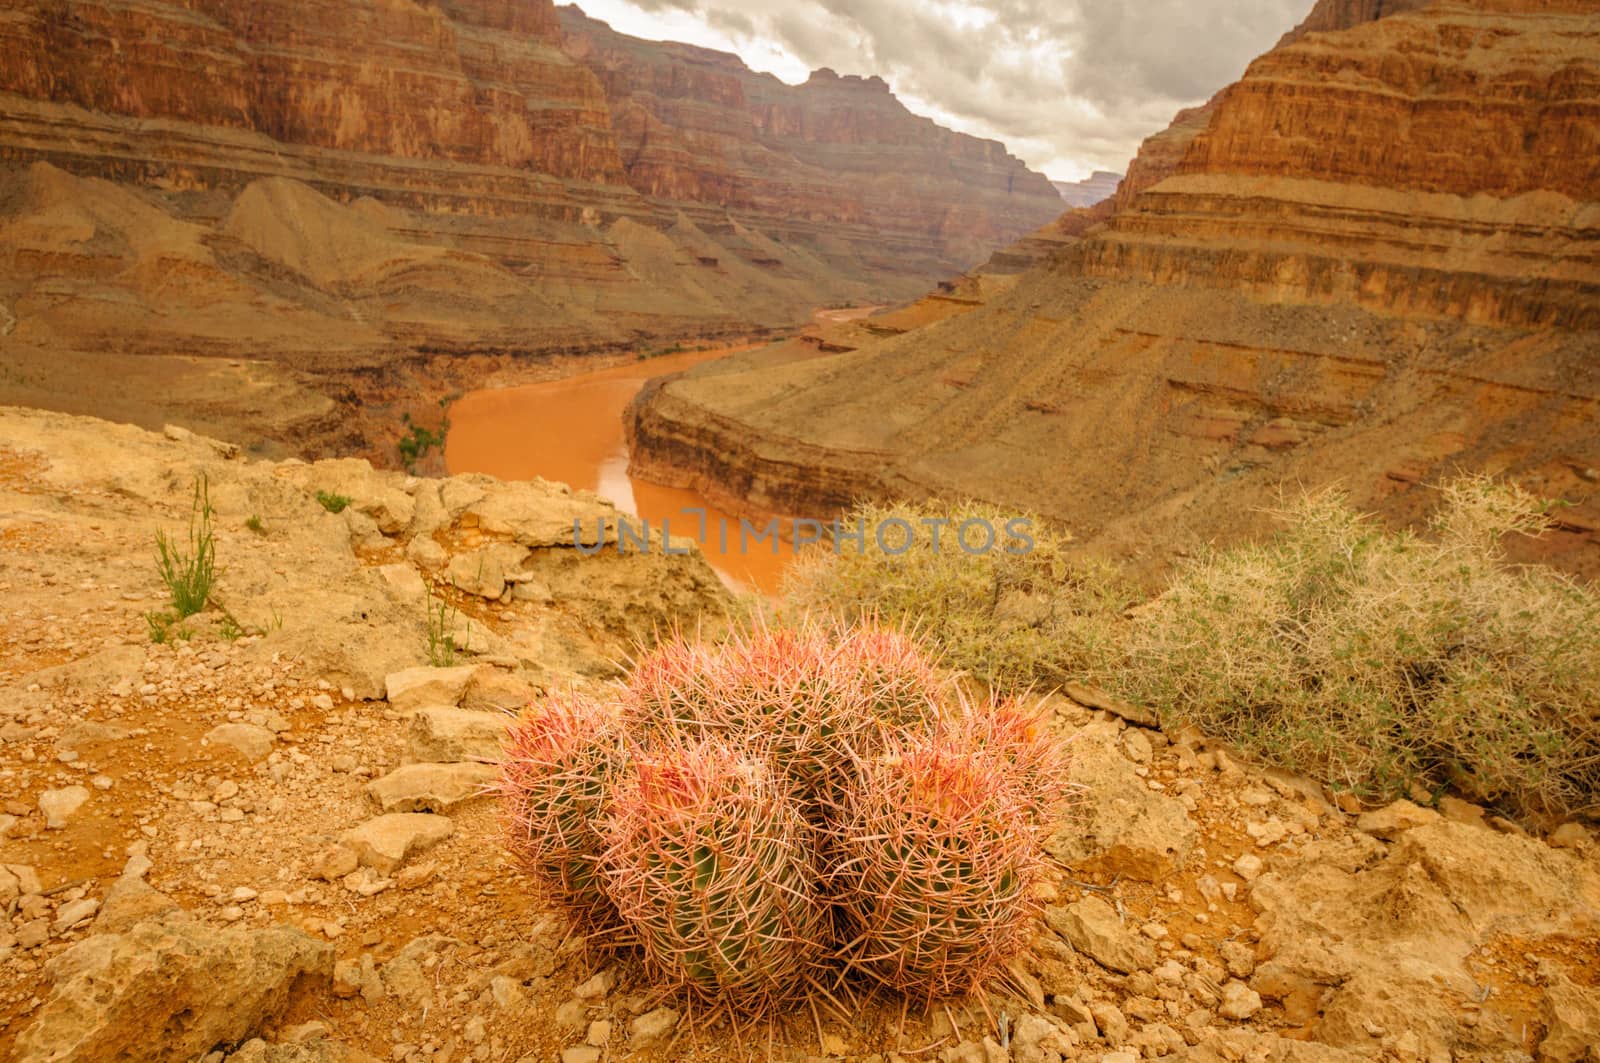 Grand Canyon cactus by weltreisendertj